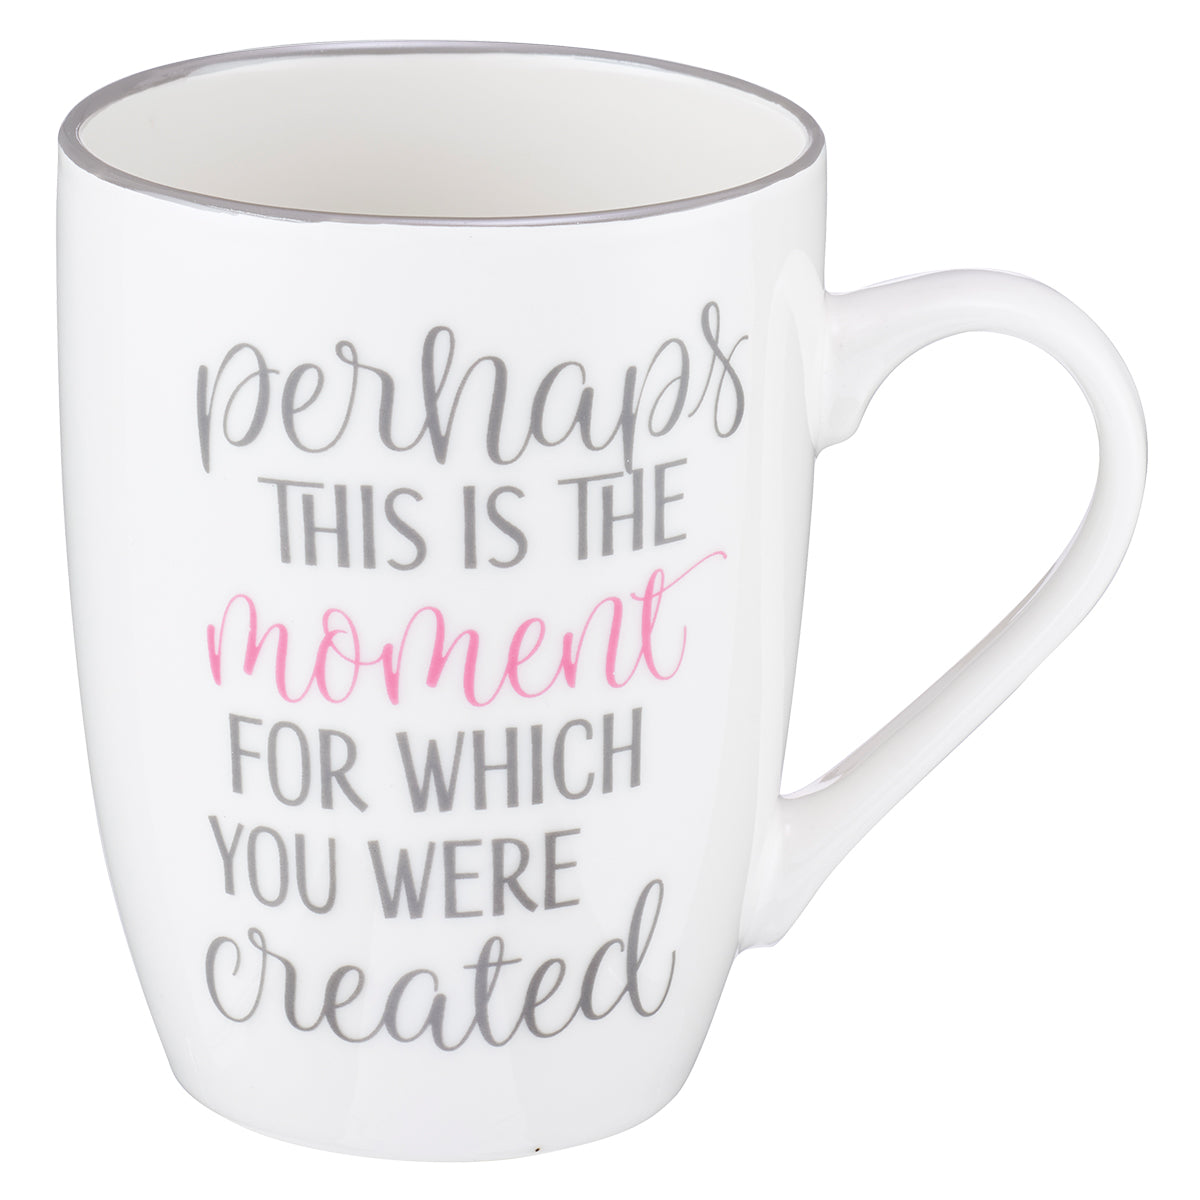 Image of This is the Moment Coffee Mug - Esther 4:14 other